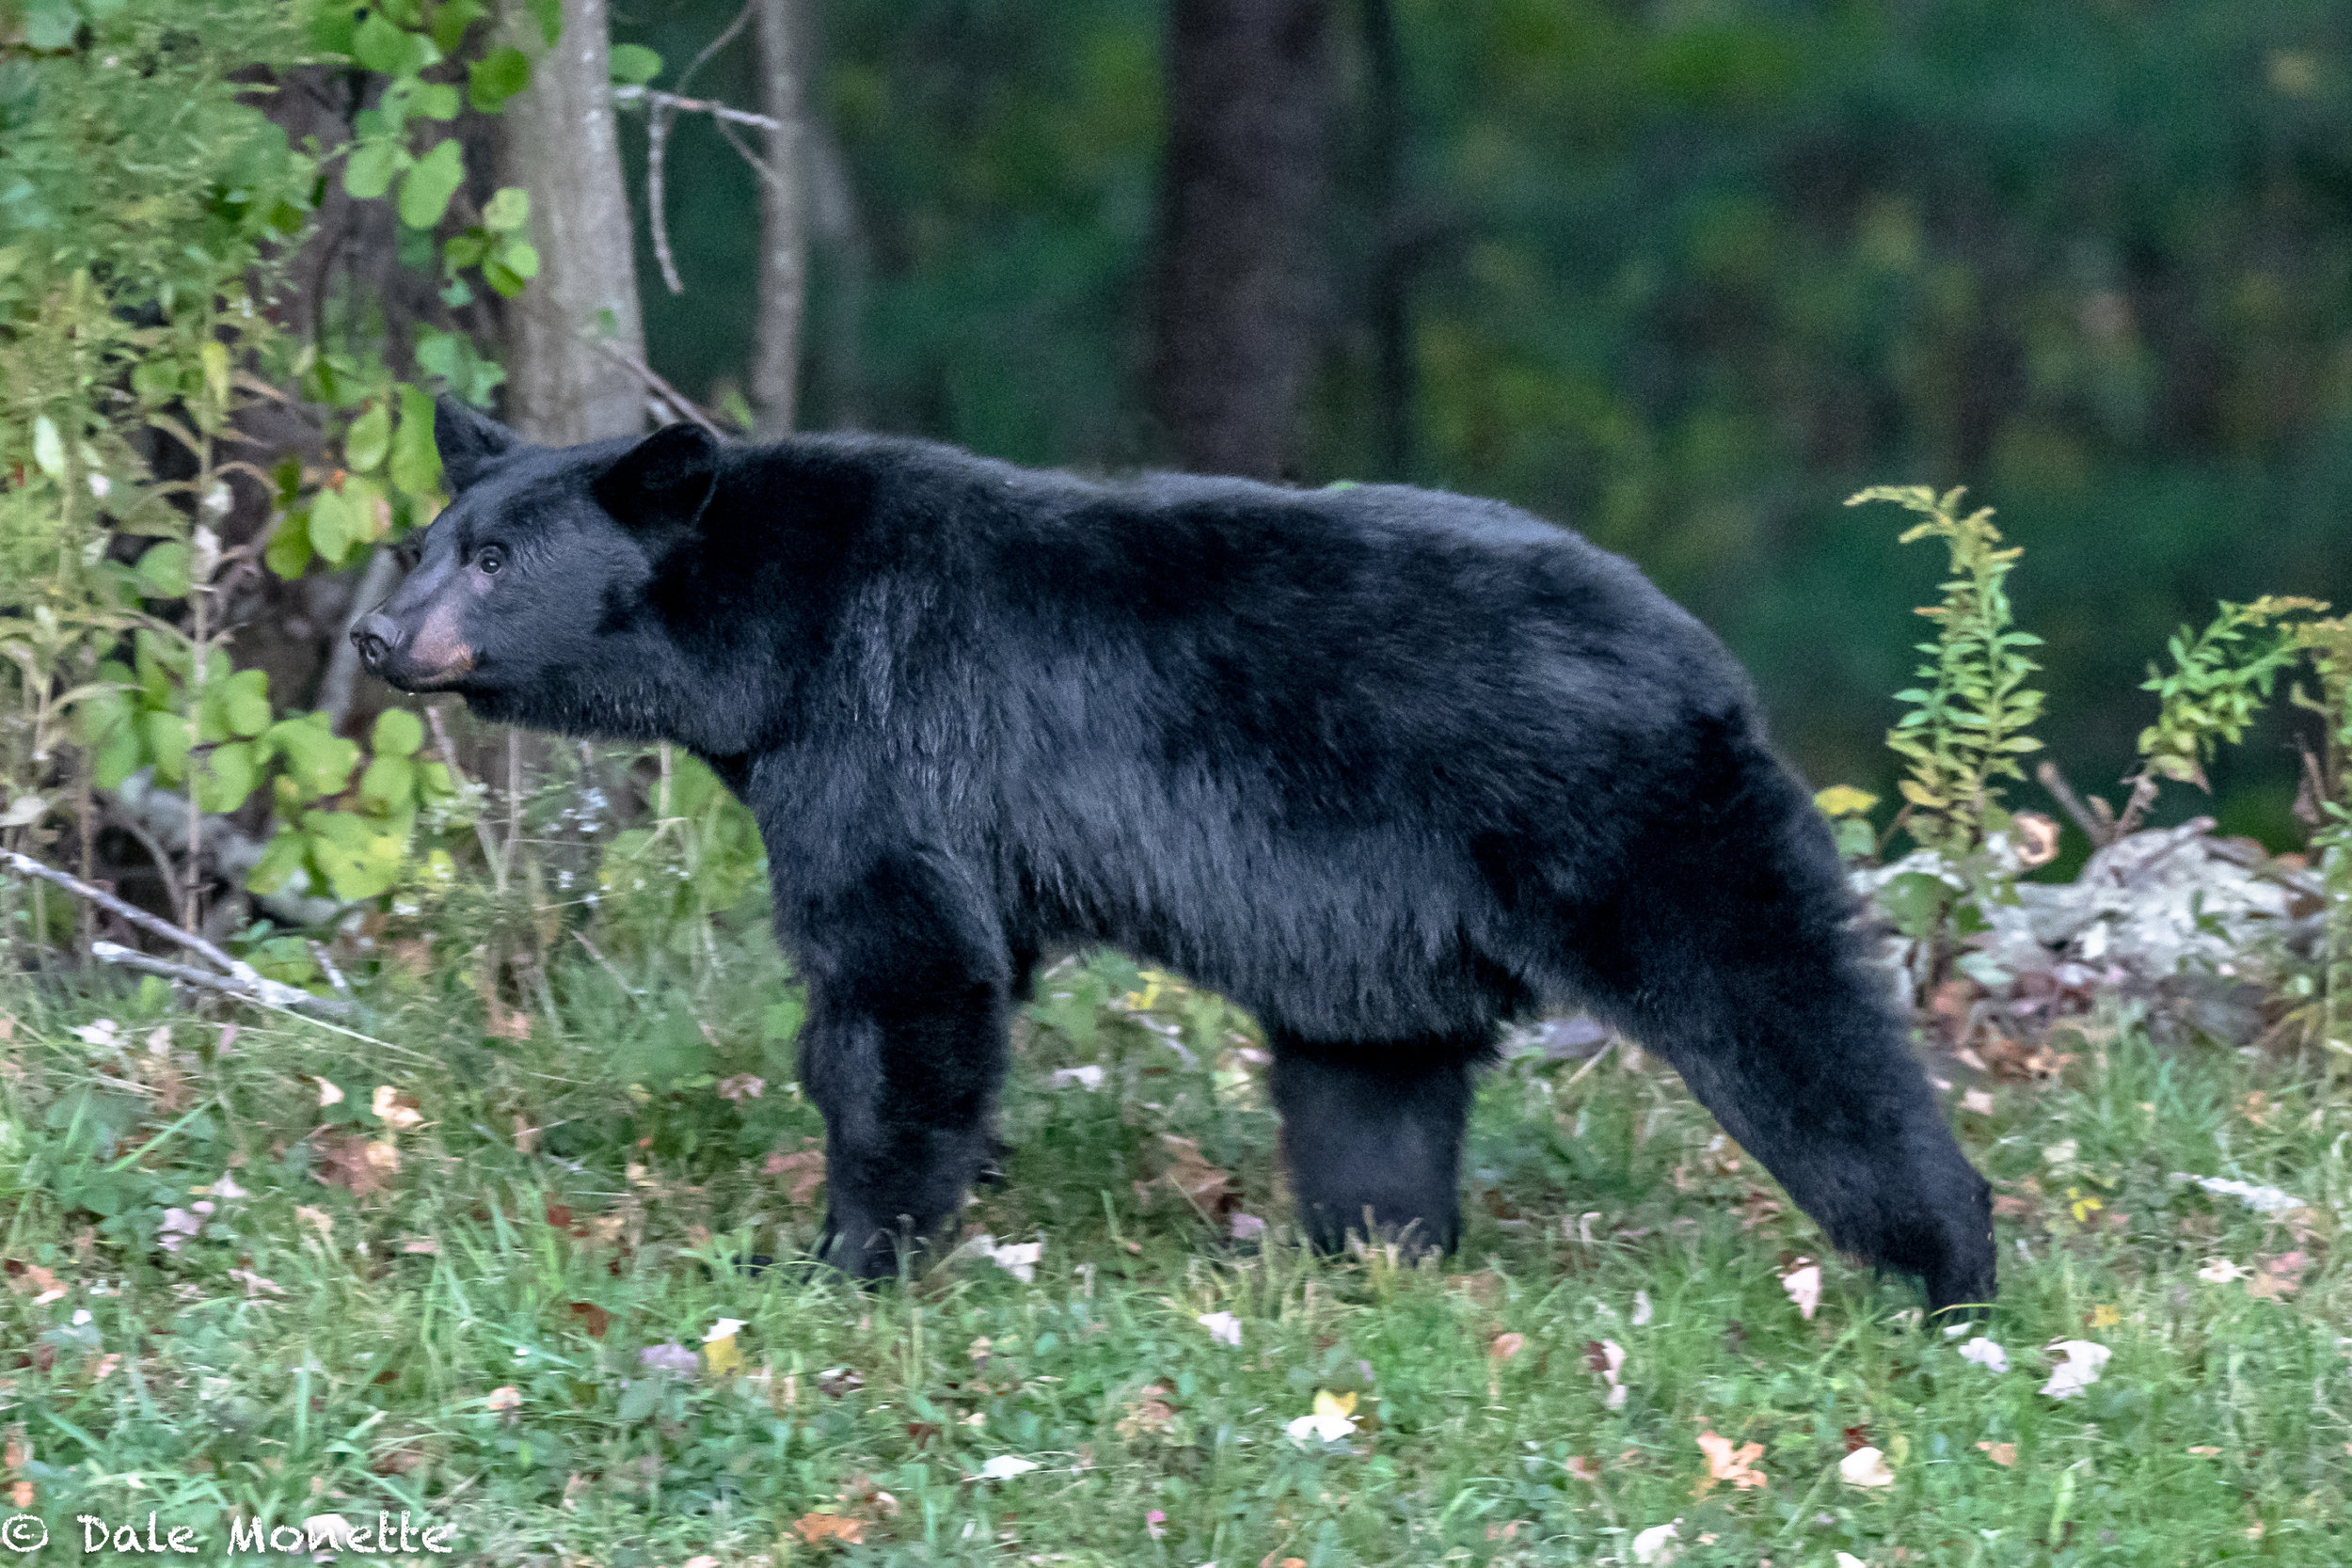   This bear walked out right in front of me one evening and started sniffing the air. Researcher say a bear can smell a piece of chicken grilling from 5 miles away. Their sense of smell is 7 times that of a blood hound. Within 15 seconds it shot into